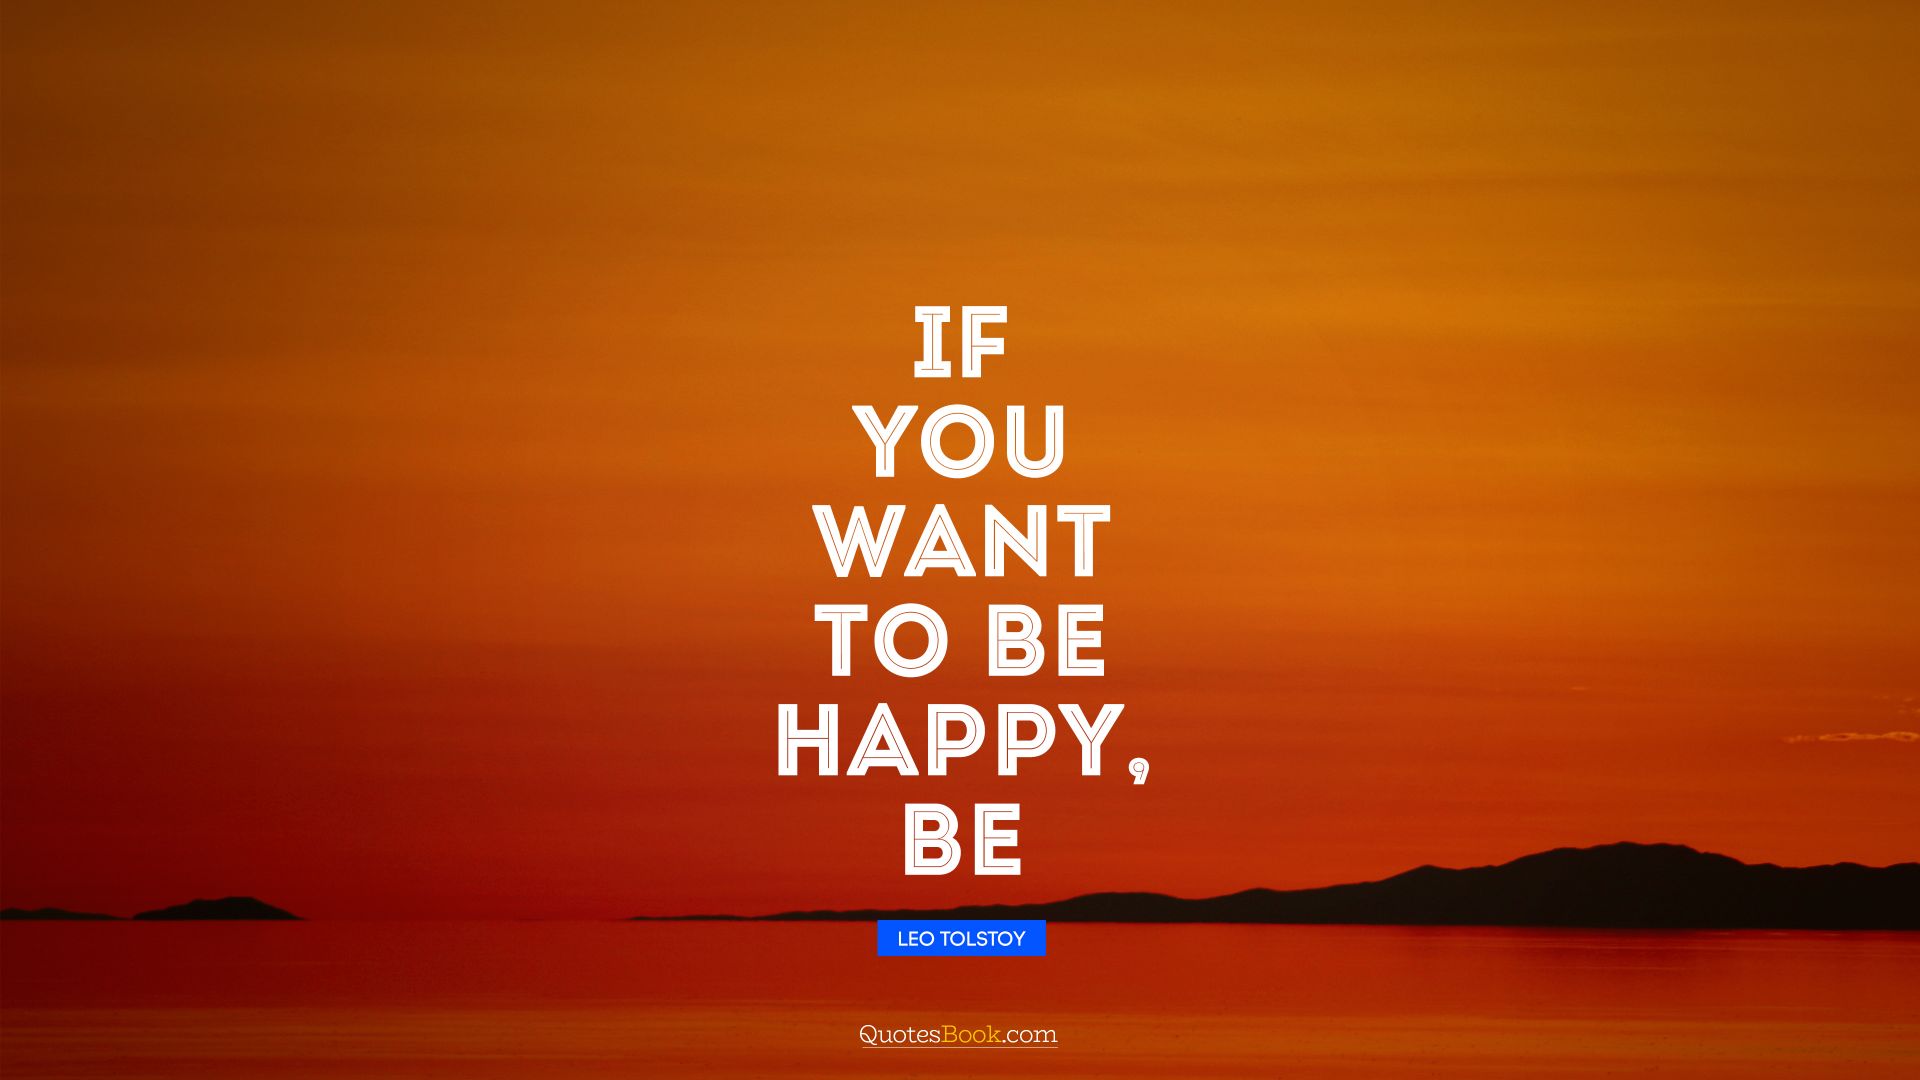 If you want to be happy, be. - Quote by Leo Tolstoy